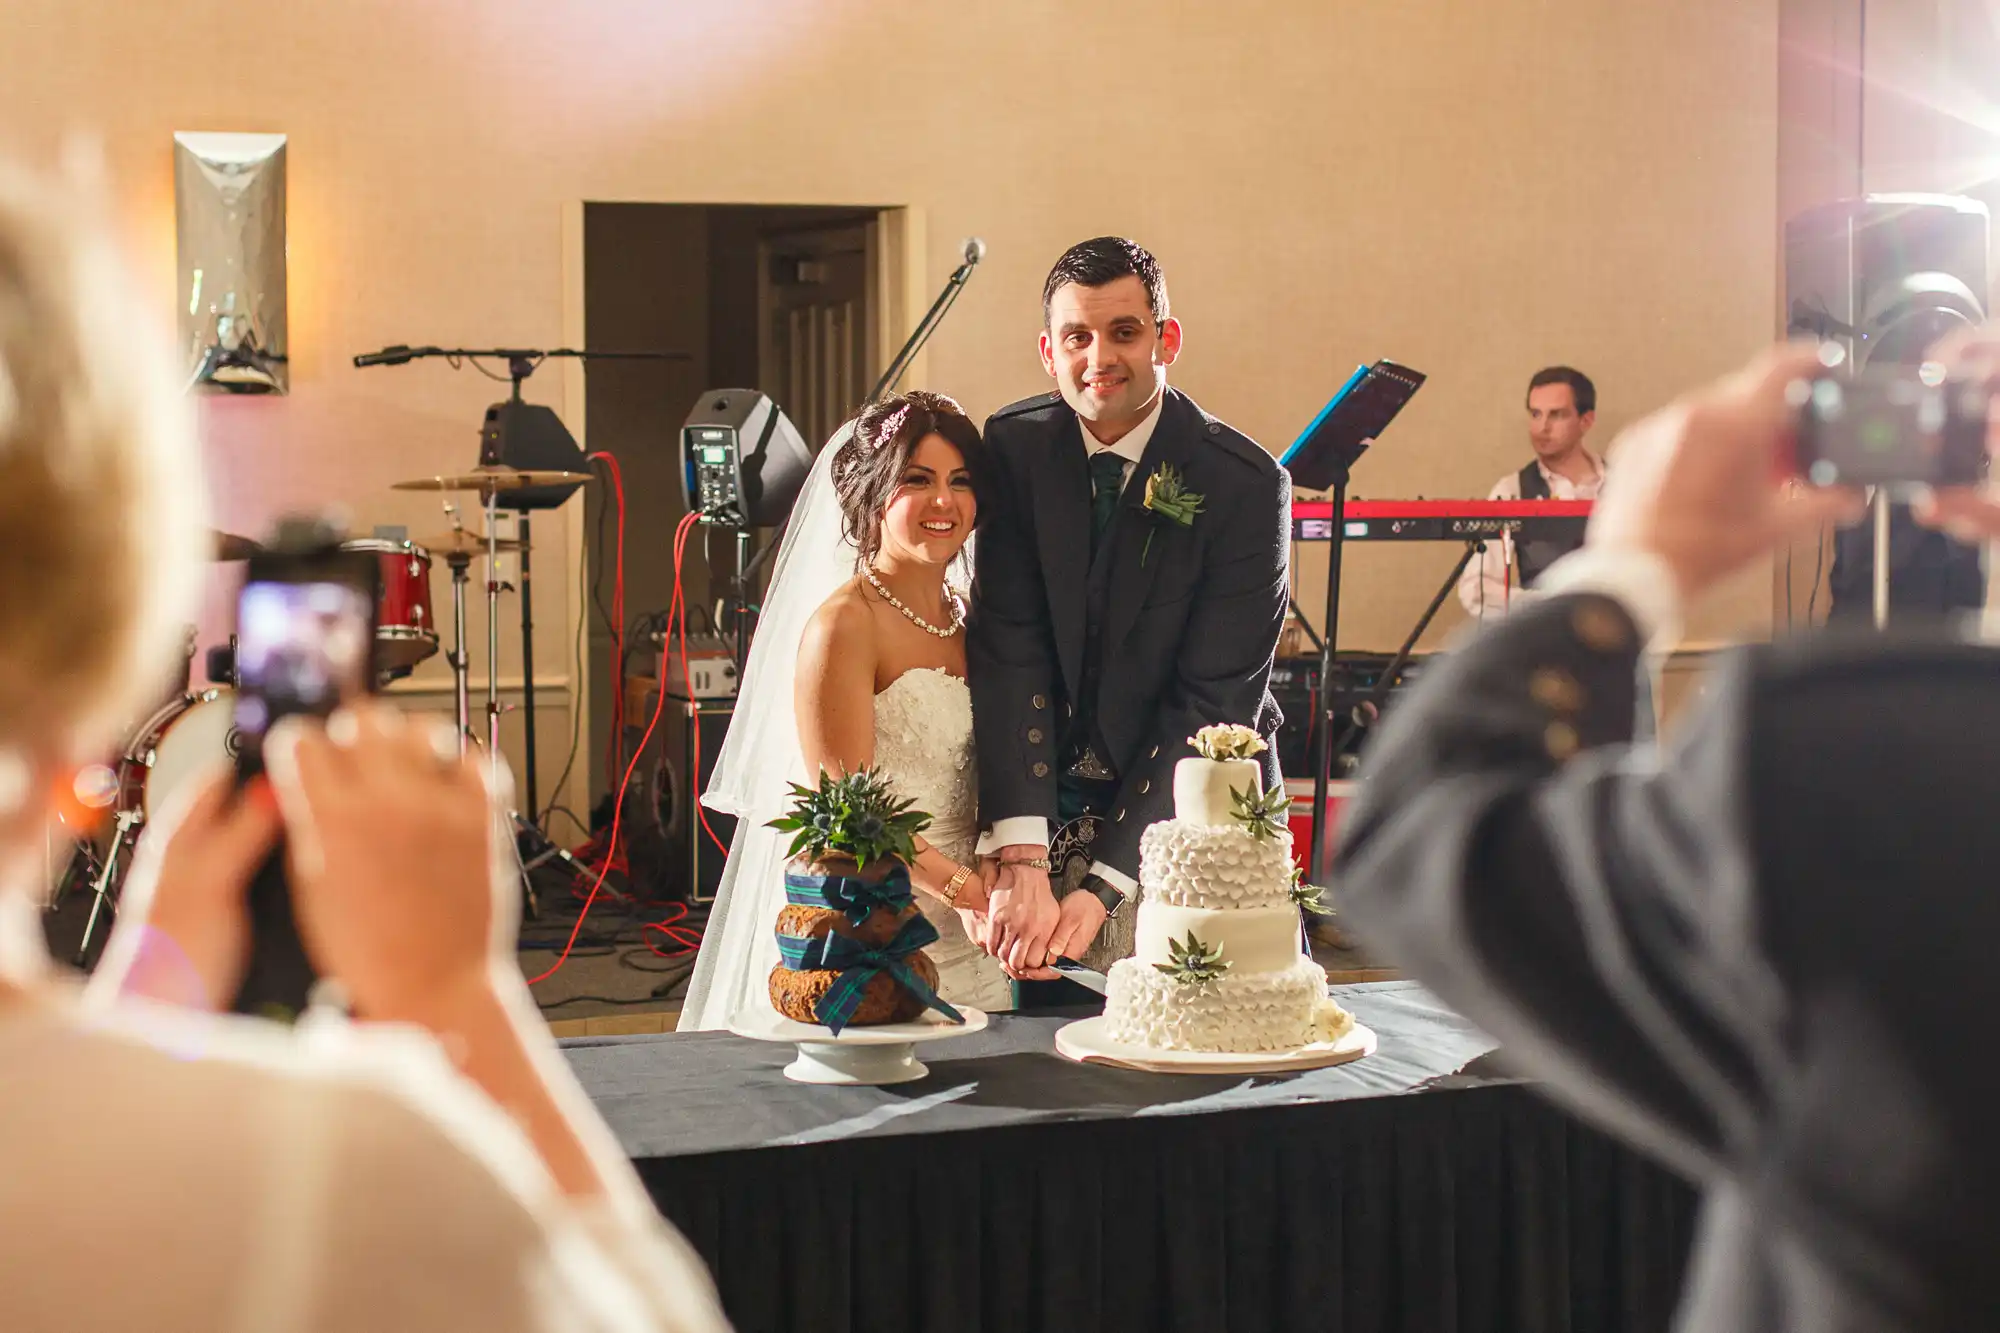 A bride and groom smiling beside their wedding cake, surrounded by guests capturing the moment with cameras.